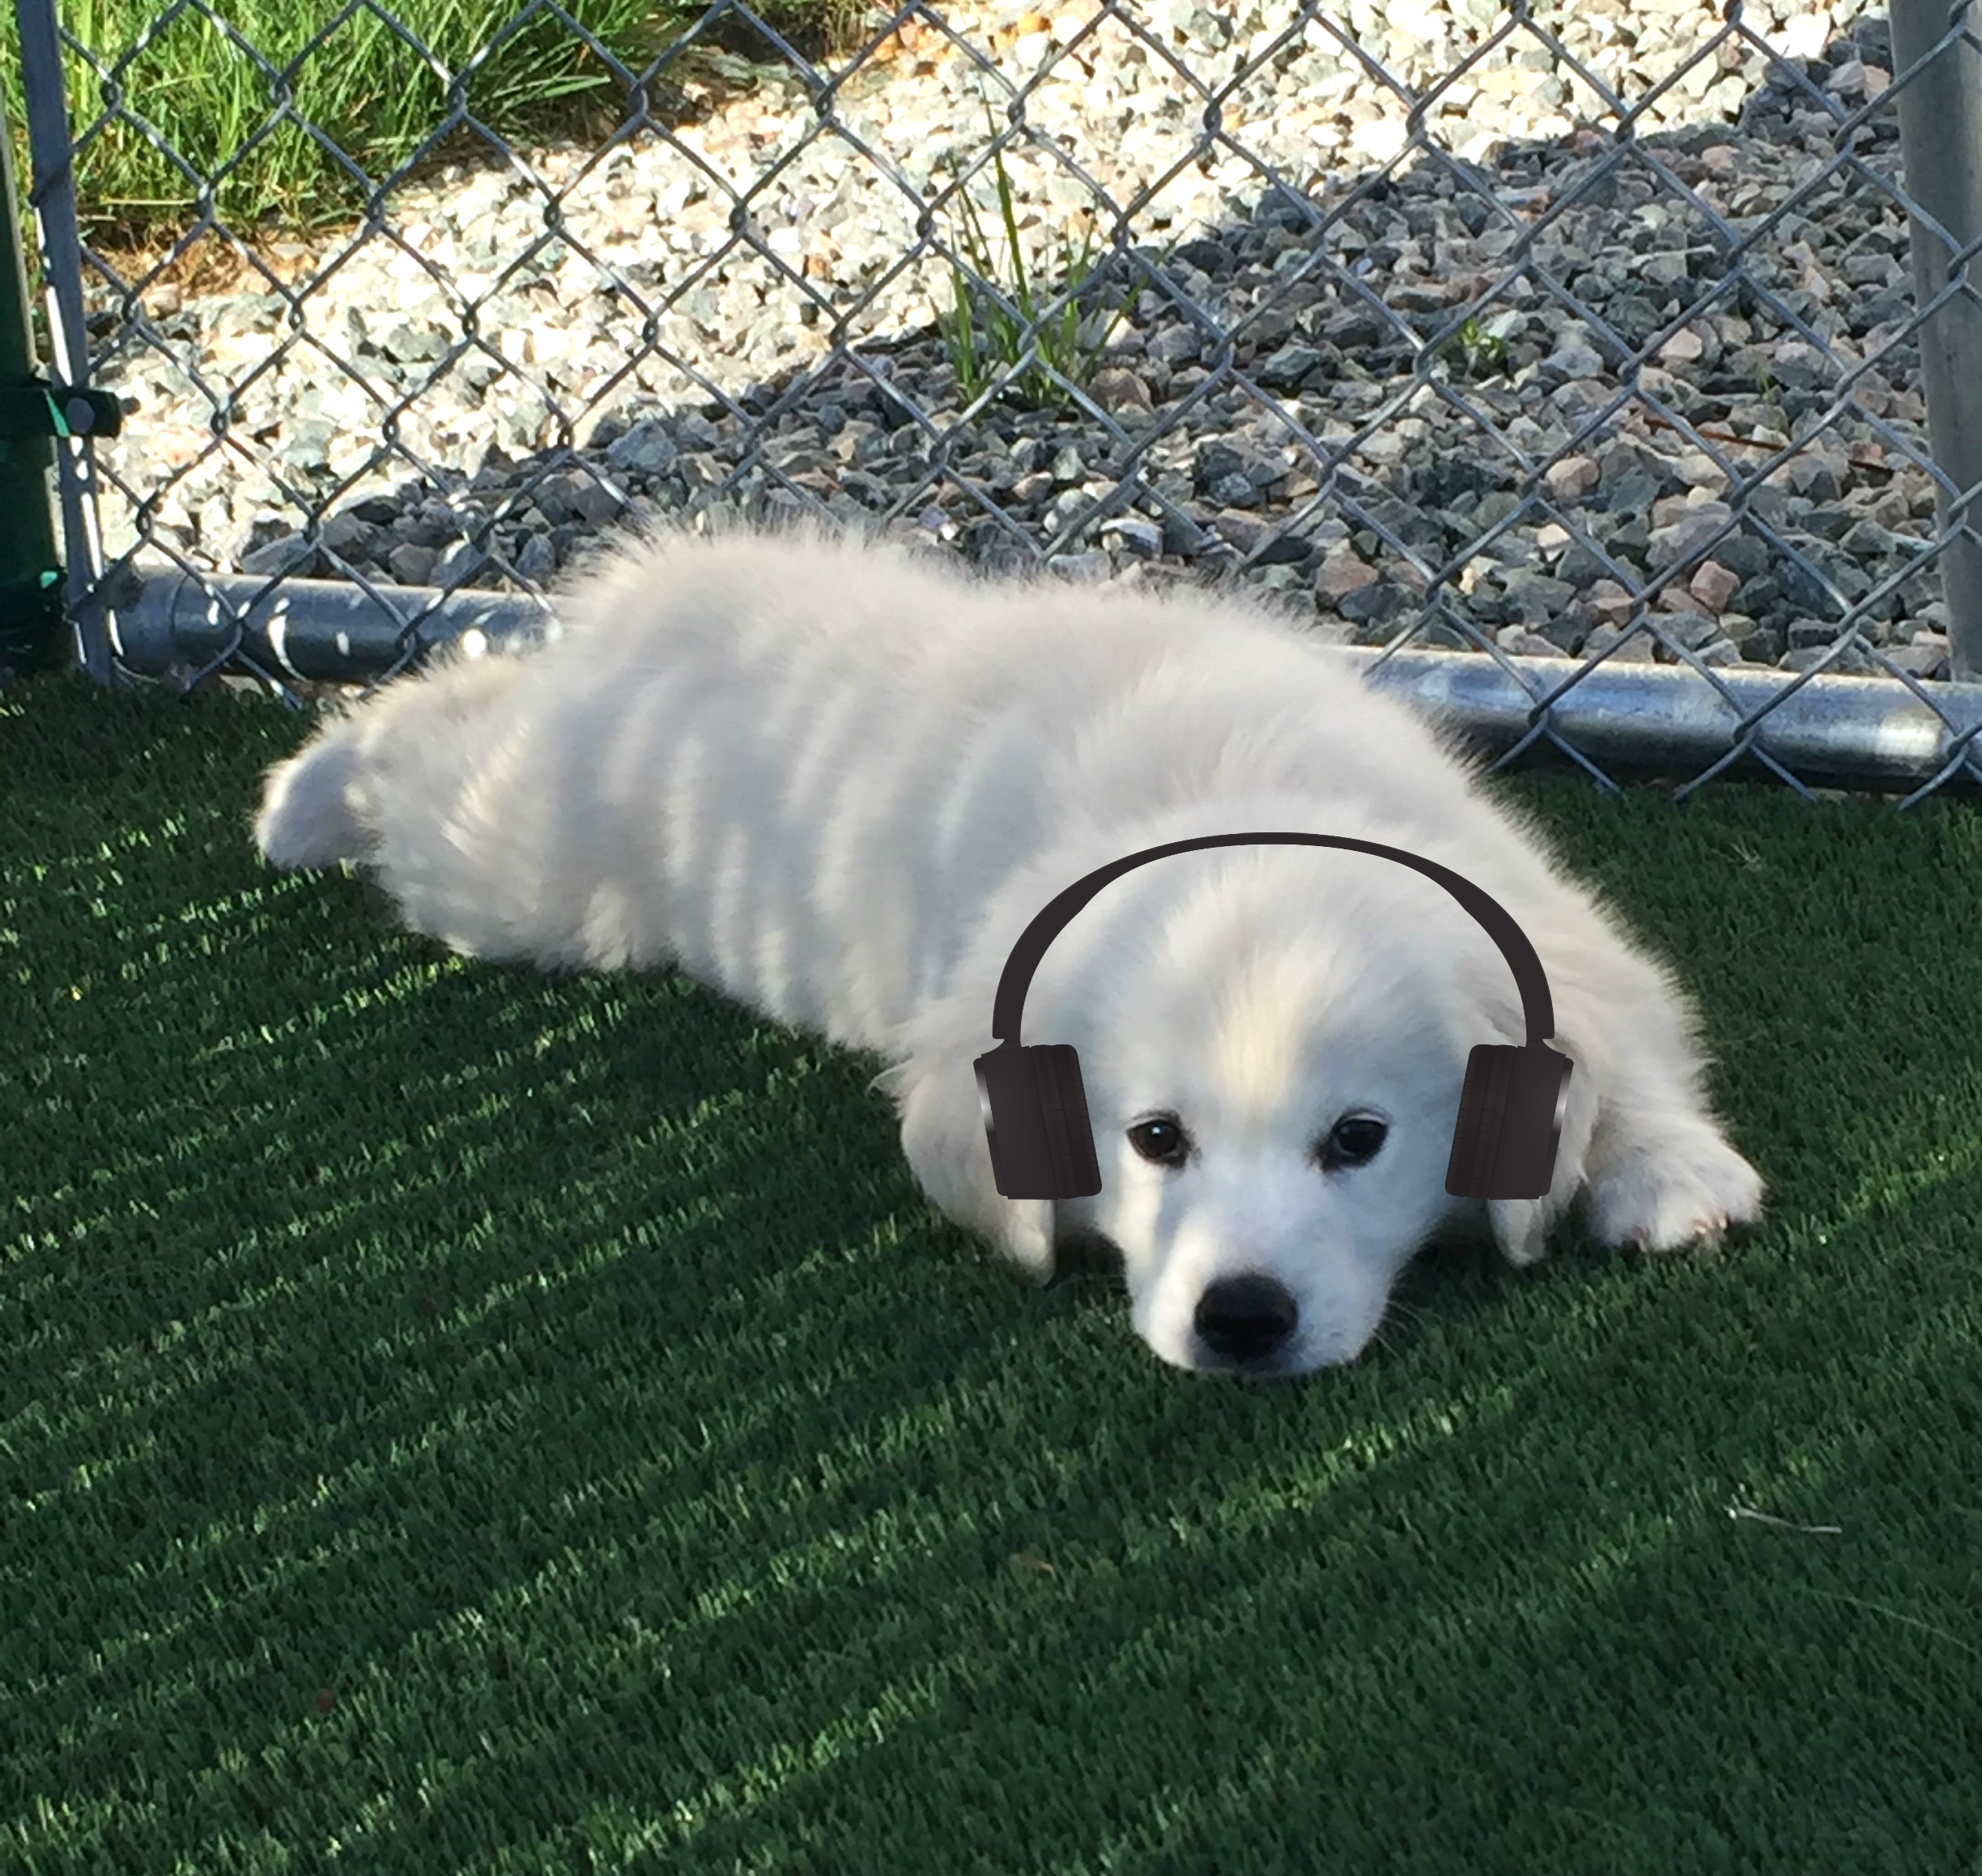 comforting music for dogs